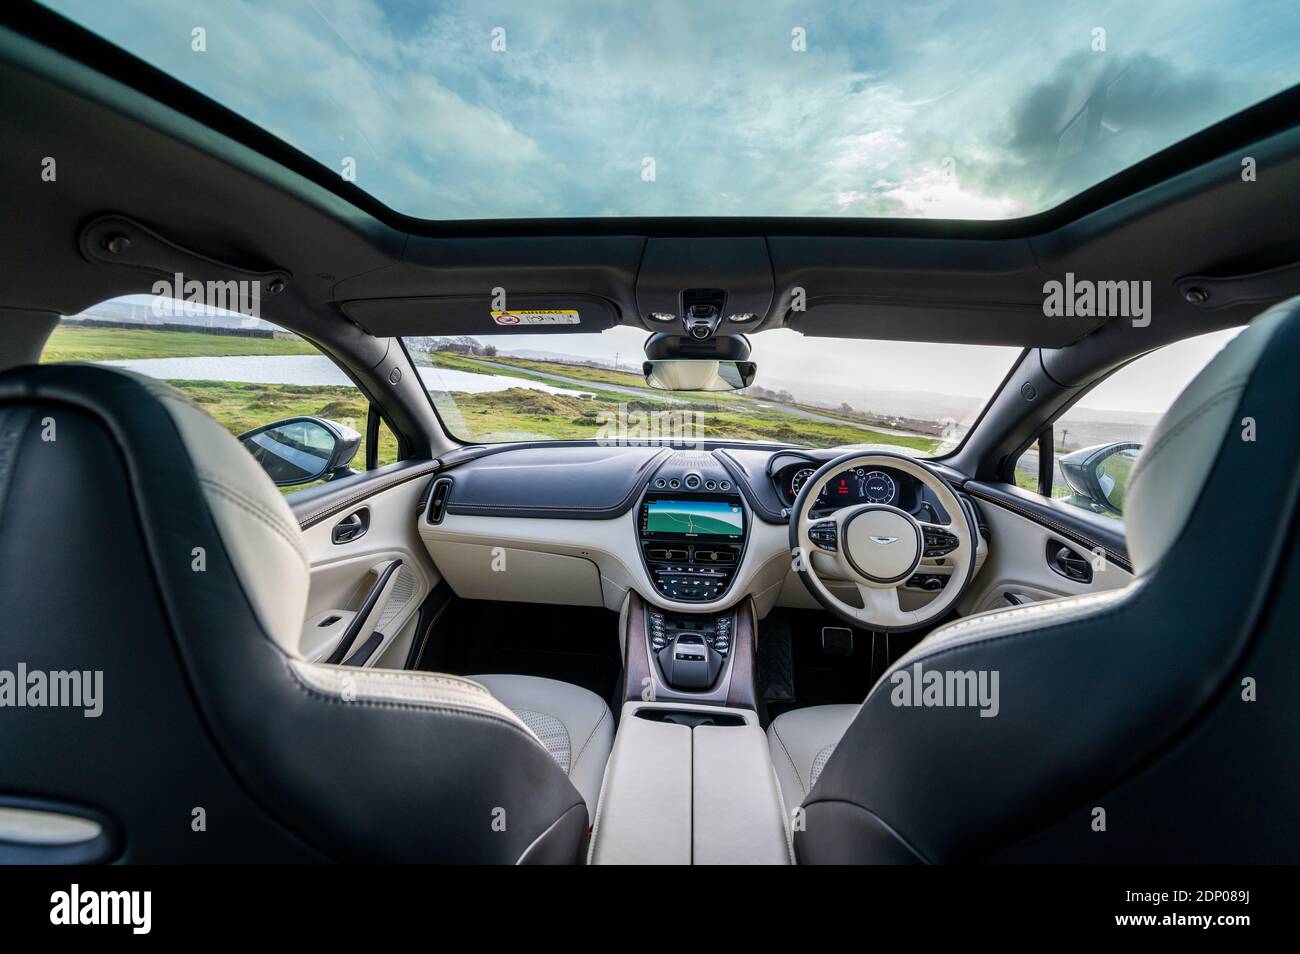 Interior of an Aston Martin DBX 4 litre V8 SUV with a top speed of 180 mph and a price tag starting at £158,000. Stock Photo